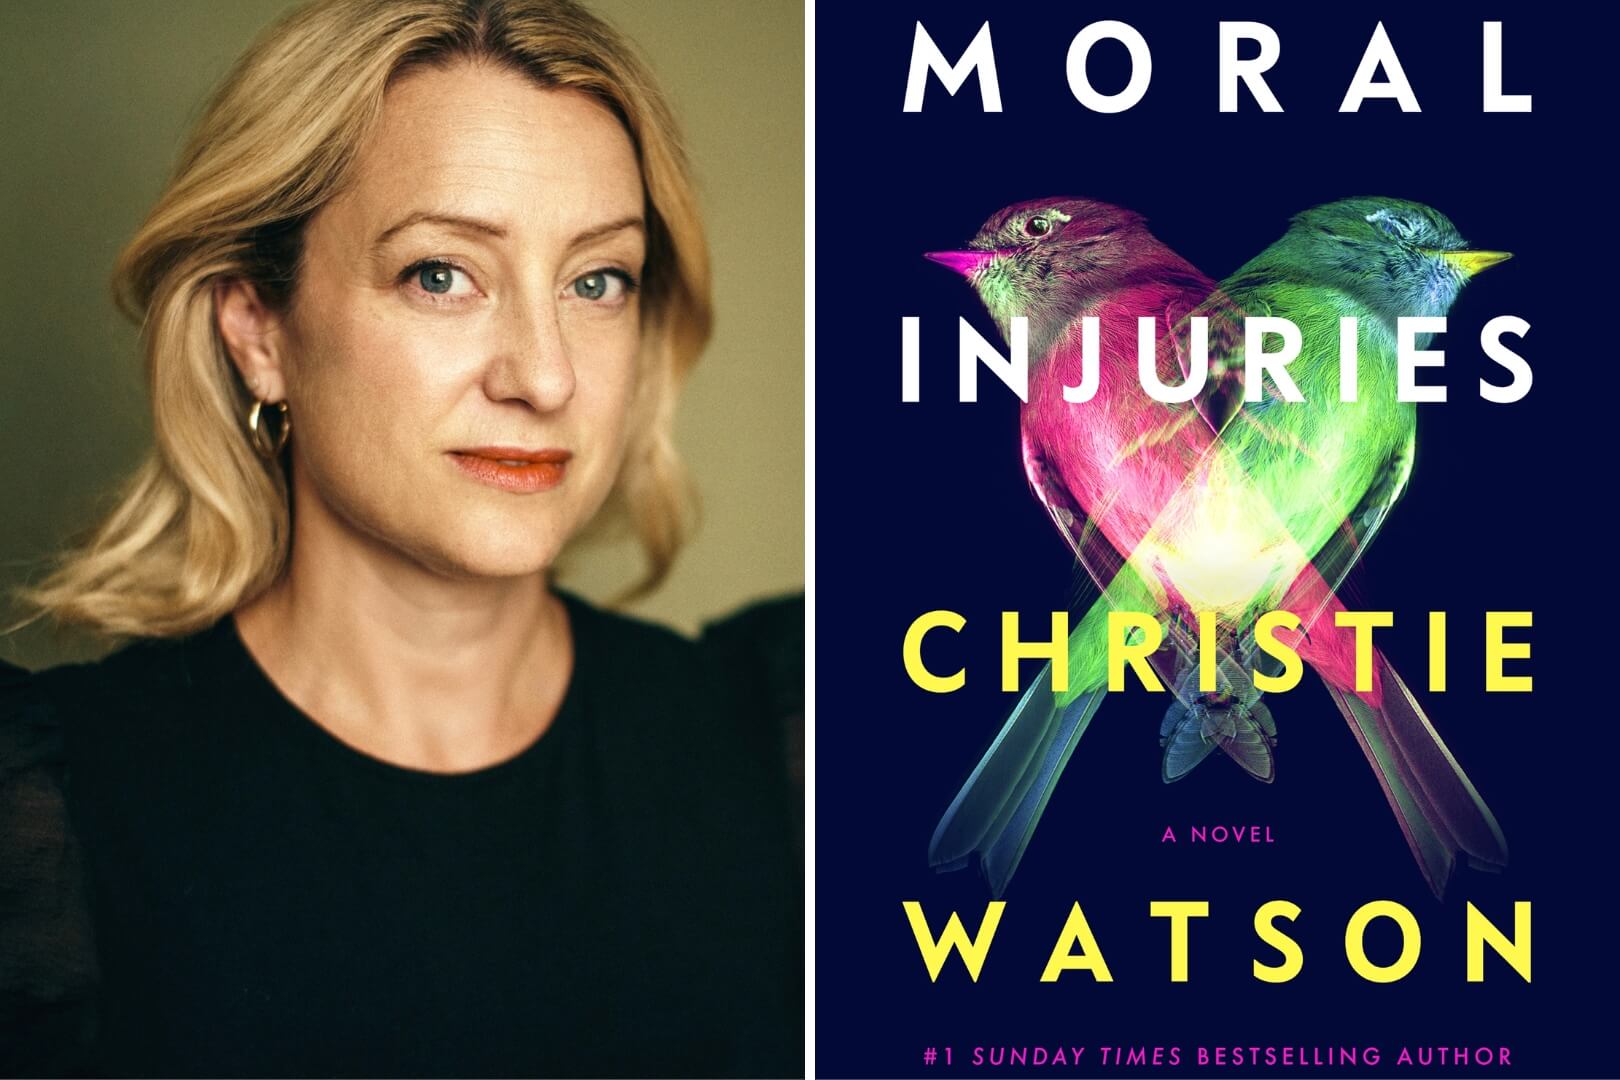 Q&A with Christie Watson, Author of Moral Injuries